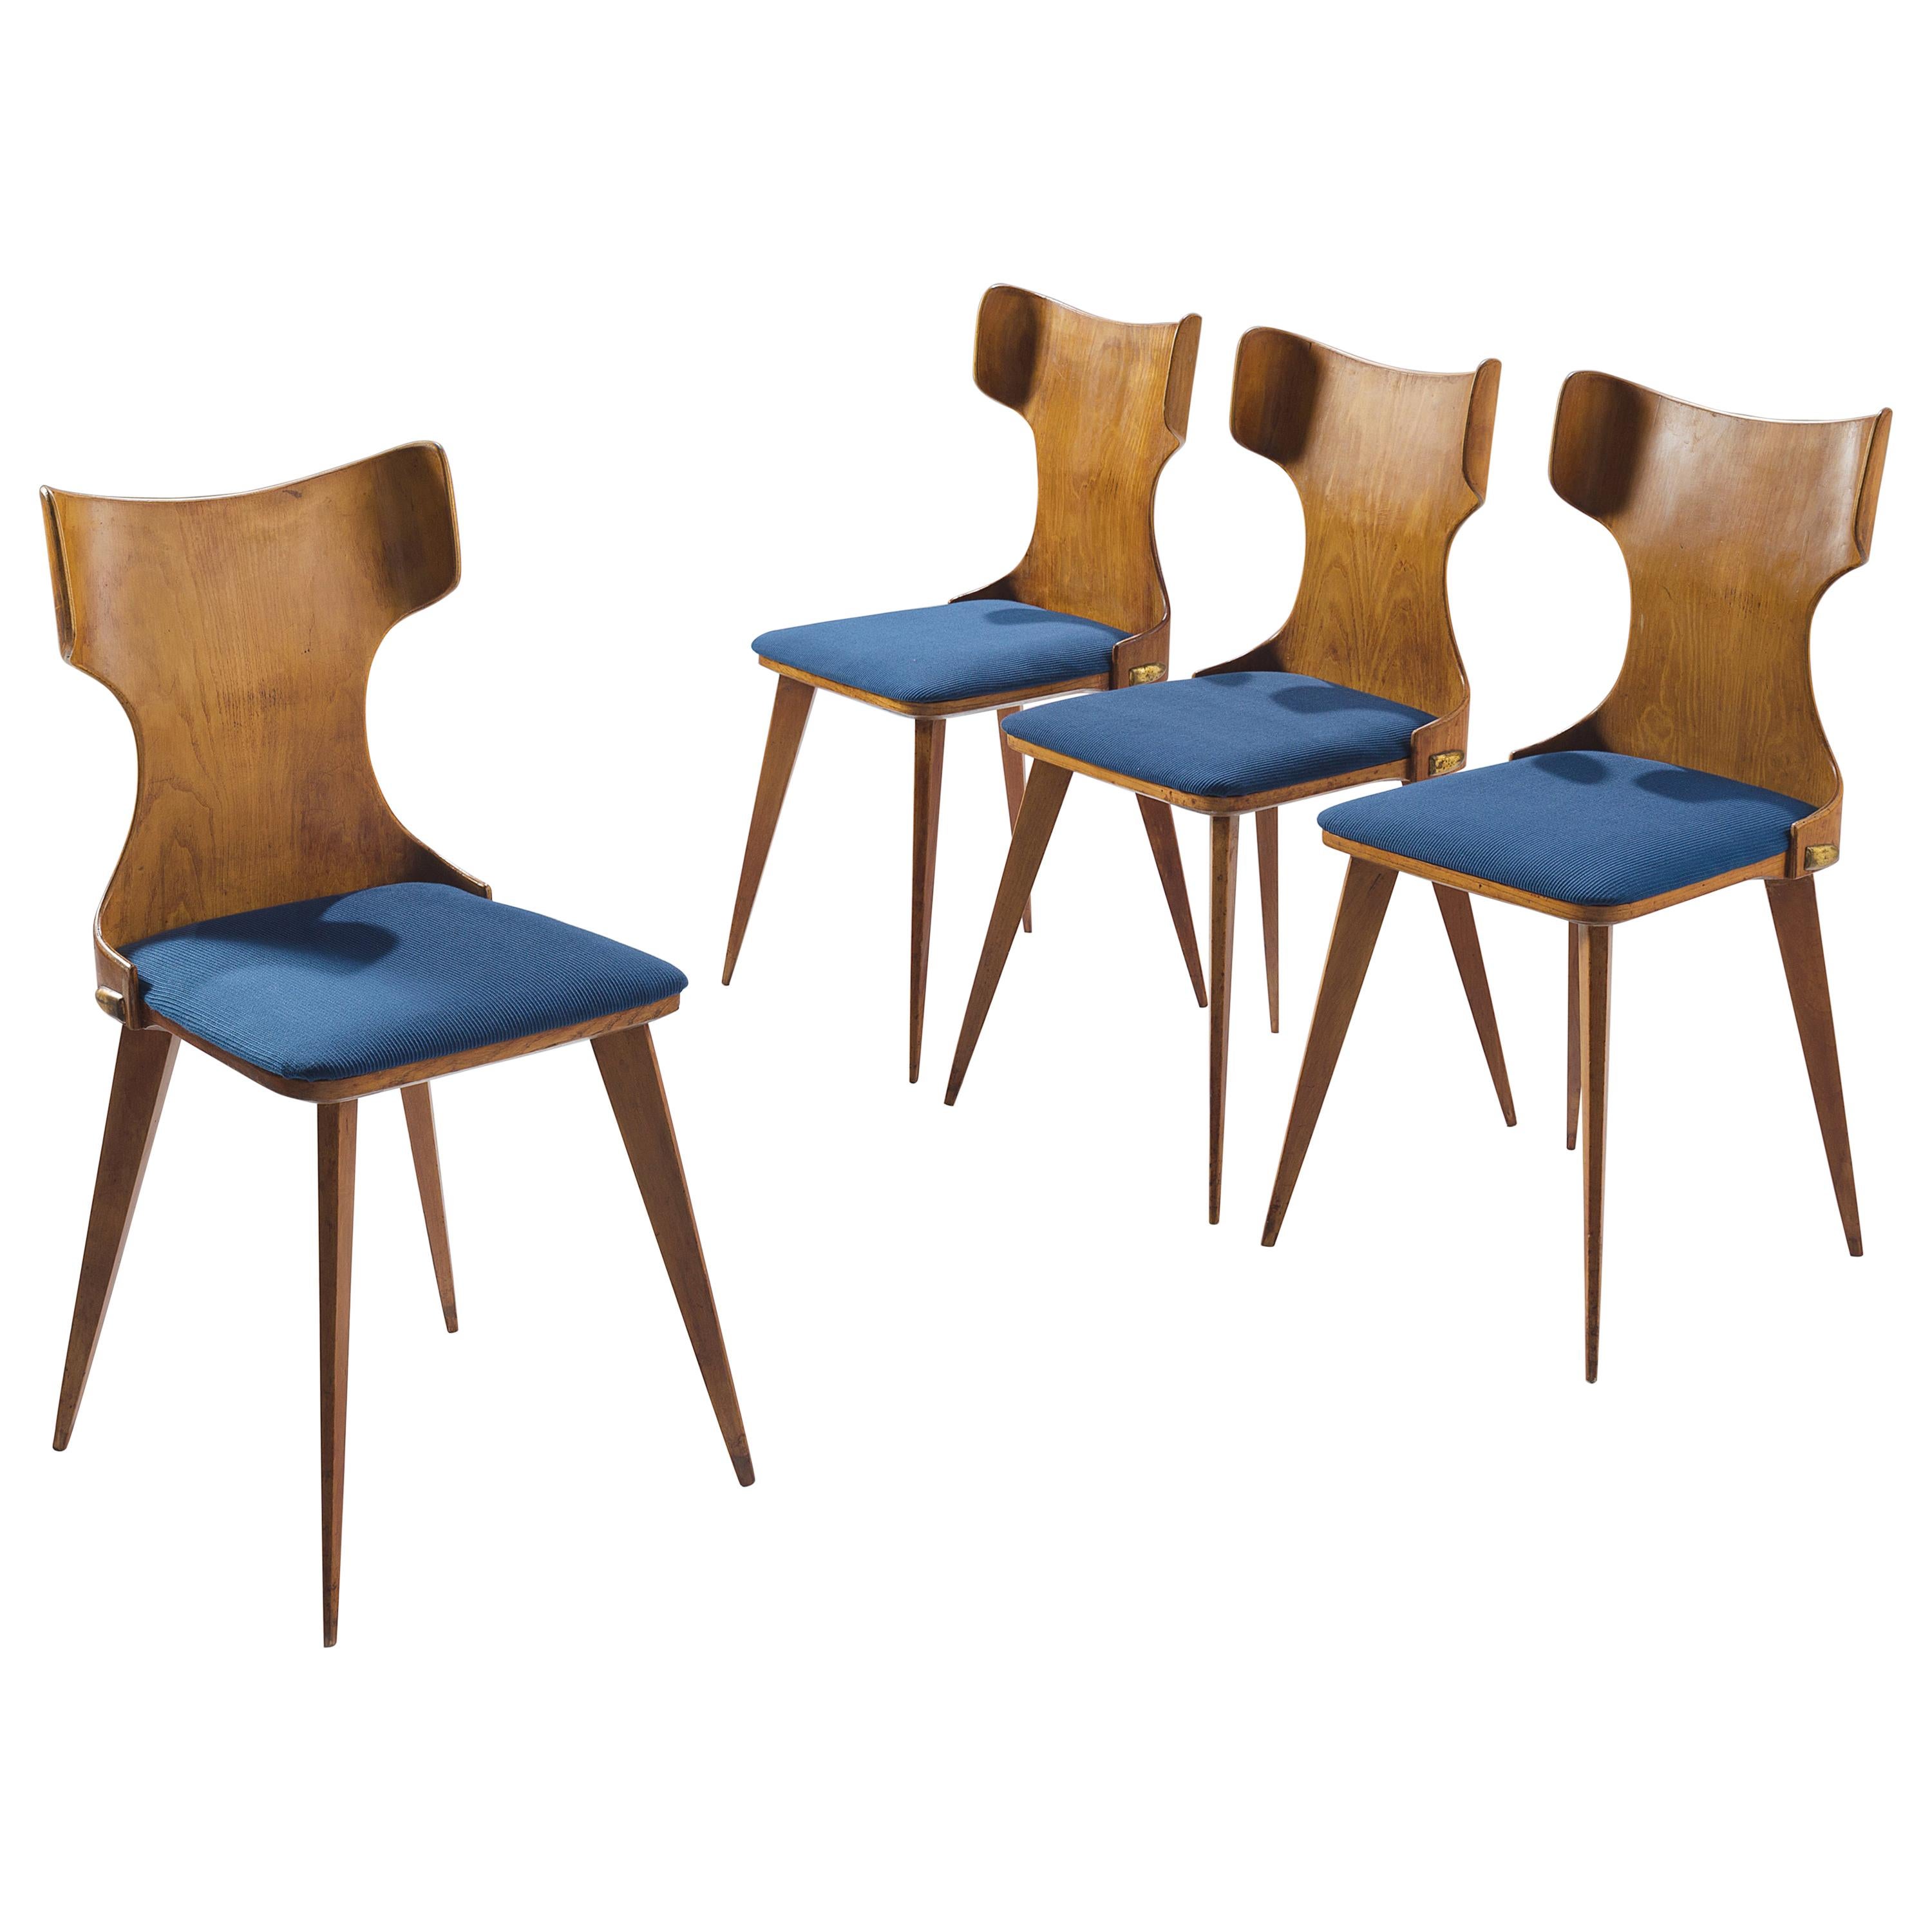 Set of Four Wingback Dining Chairs in Blue Upholstery Attributed to Carlo Ratti